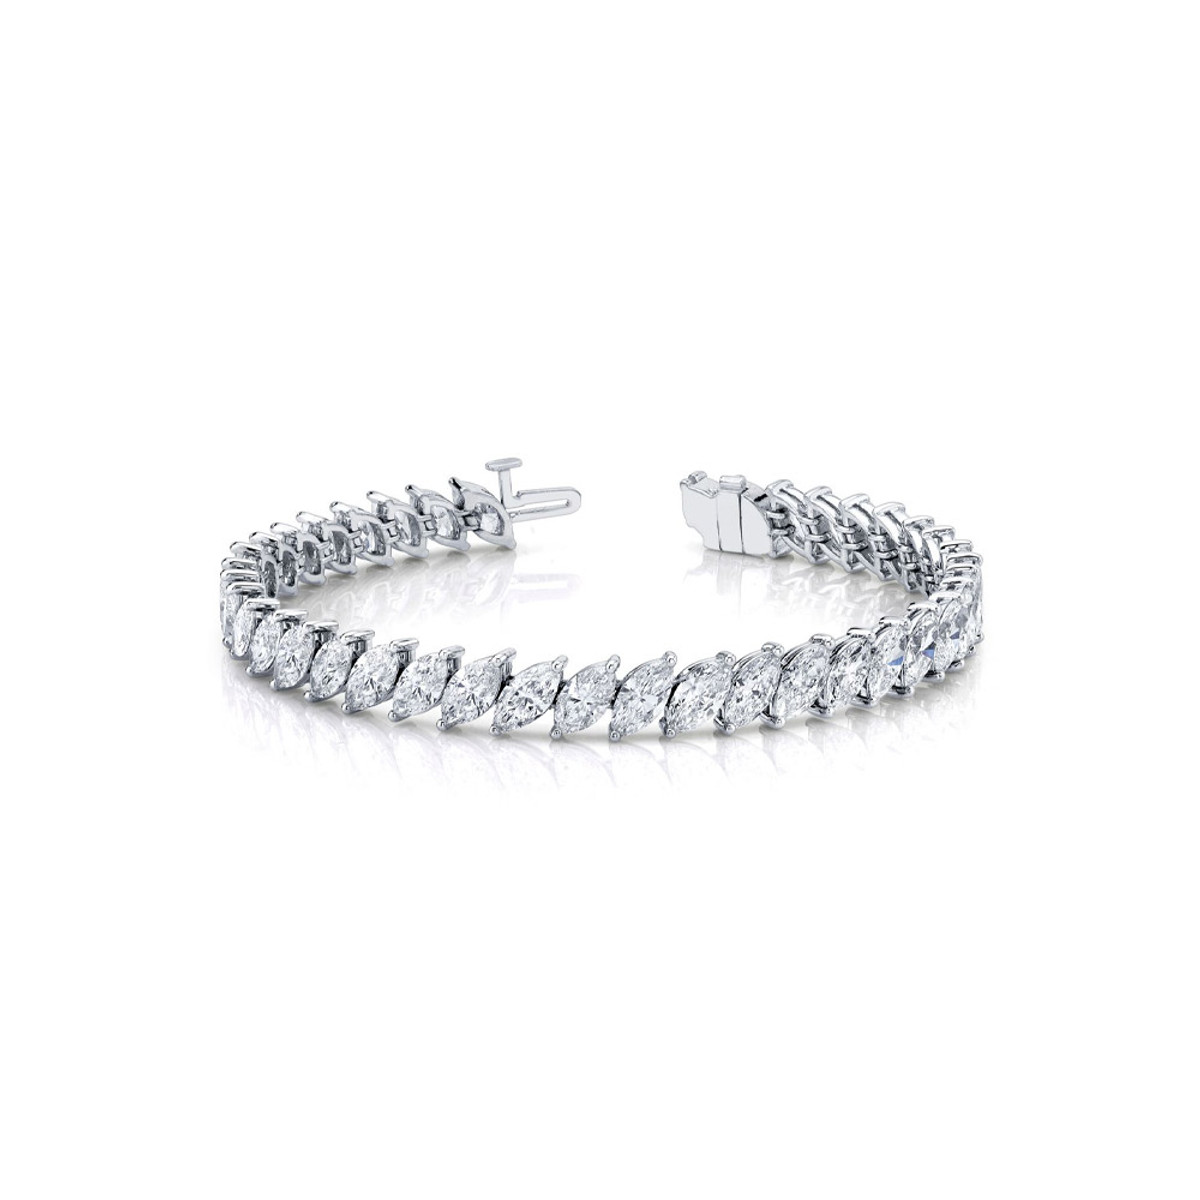 Hyde Park Collection 18K White Gold Marquise Diamond Line Bracelet-55850 Product Image